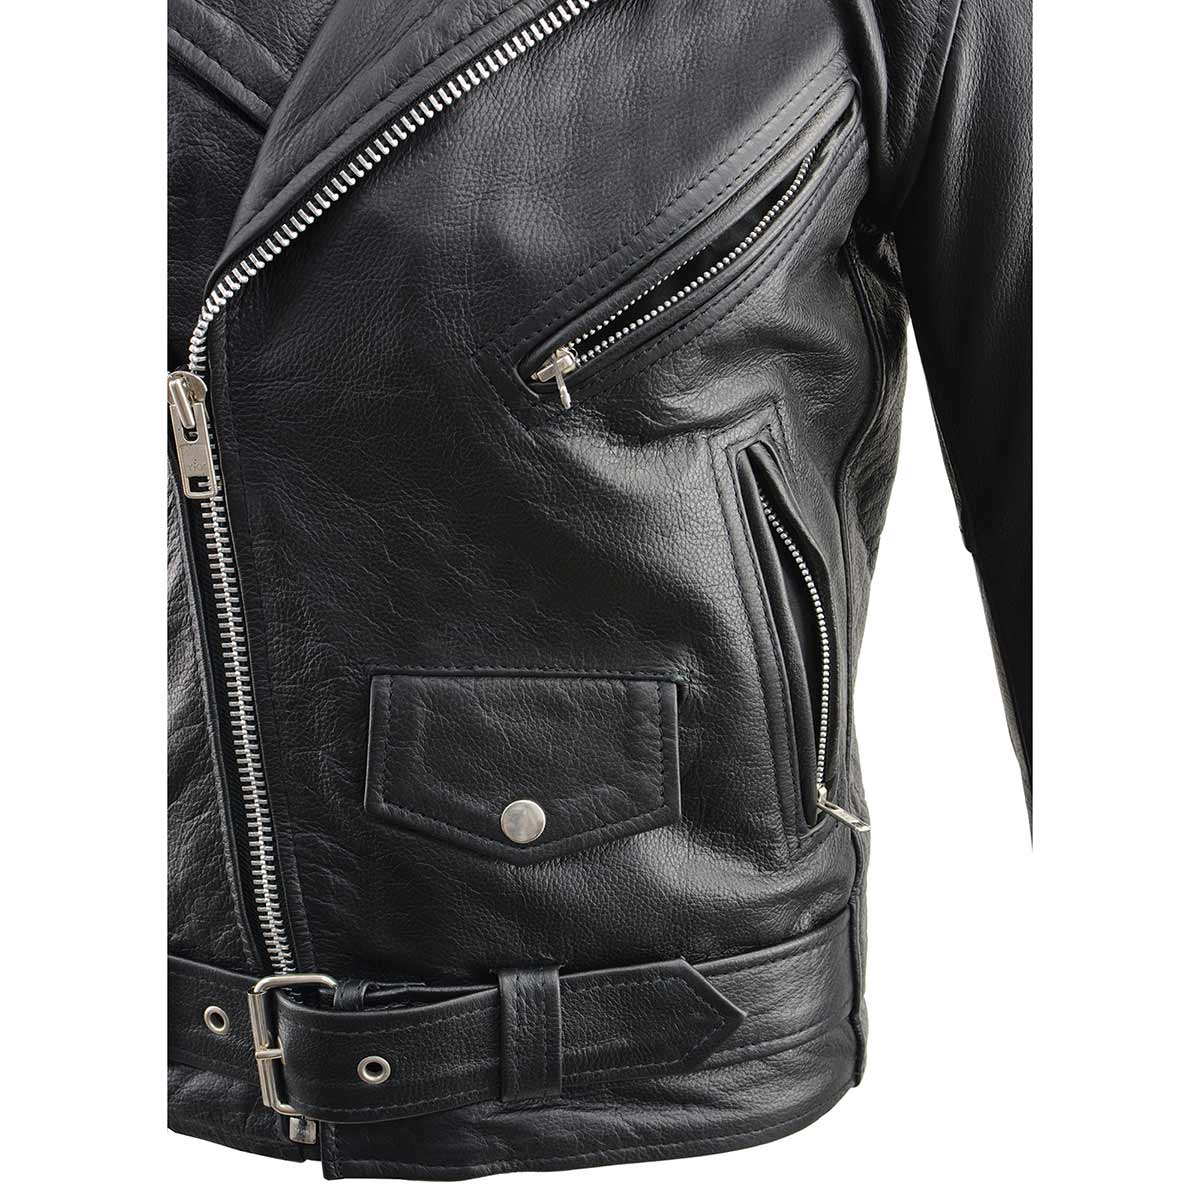 Milwaukee Leather LKM1781 Men's The Legend Classic Police Style Black Leather Motorcycle Jacket w/ Quilted Liner